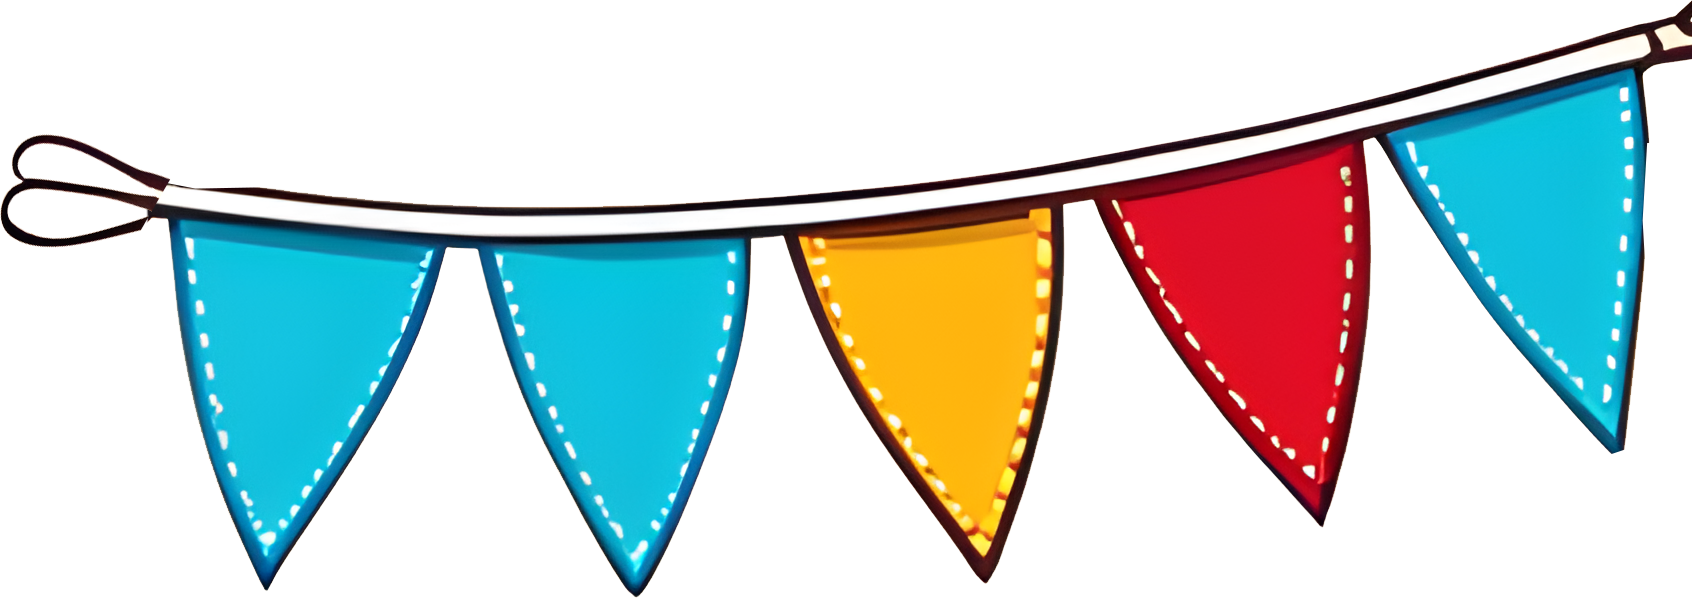 party decoration png download